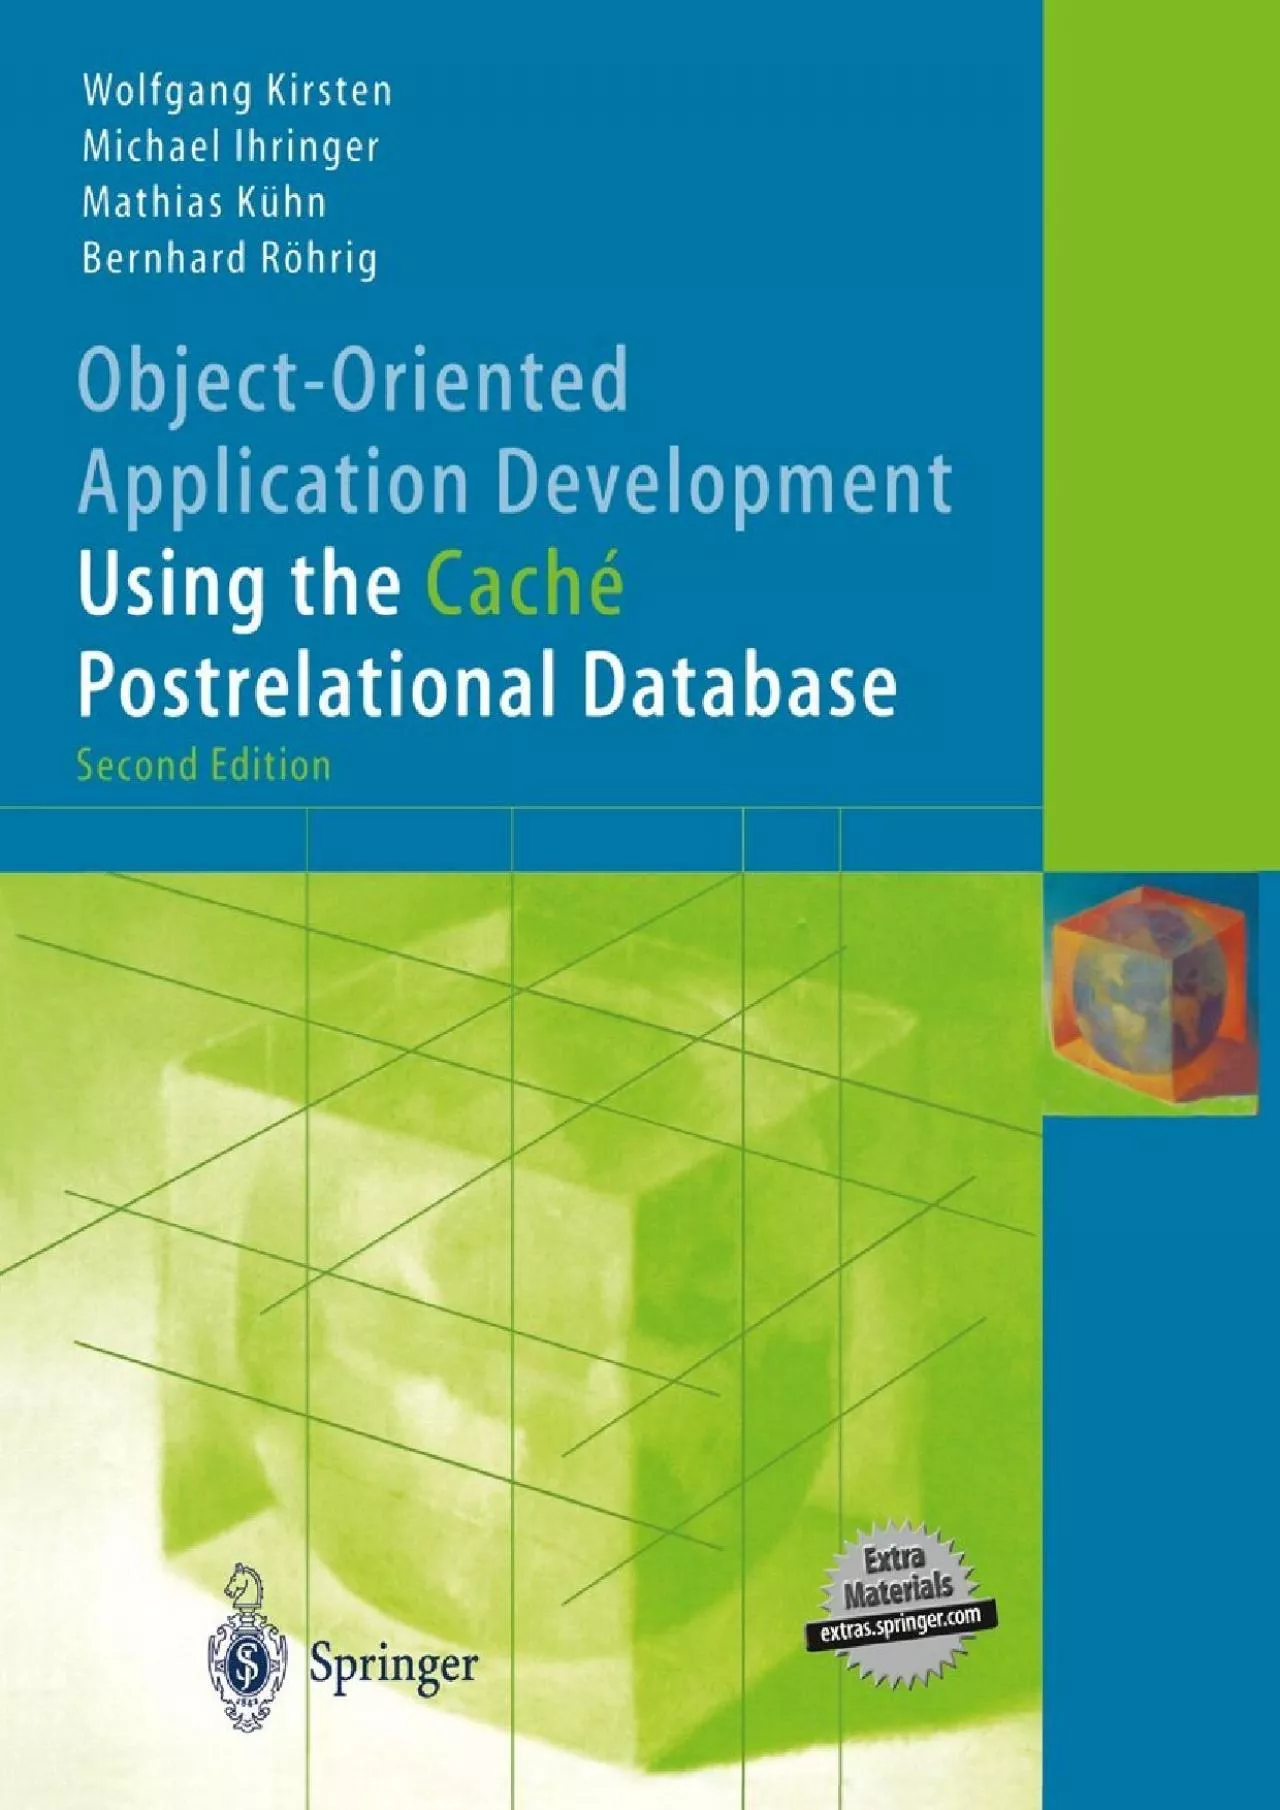 [READ]-Object-Oriented Application Development Using the Caché Postrelational Database